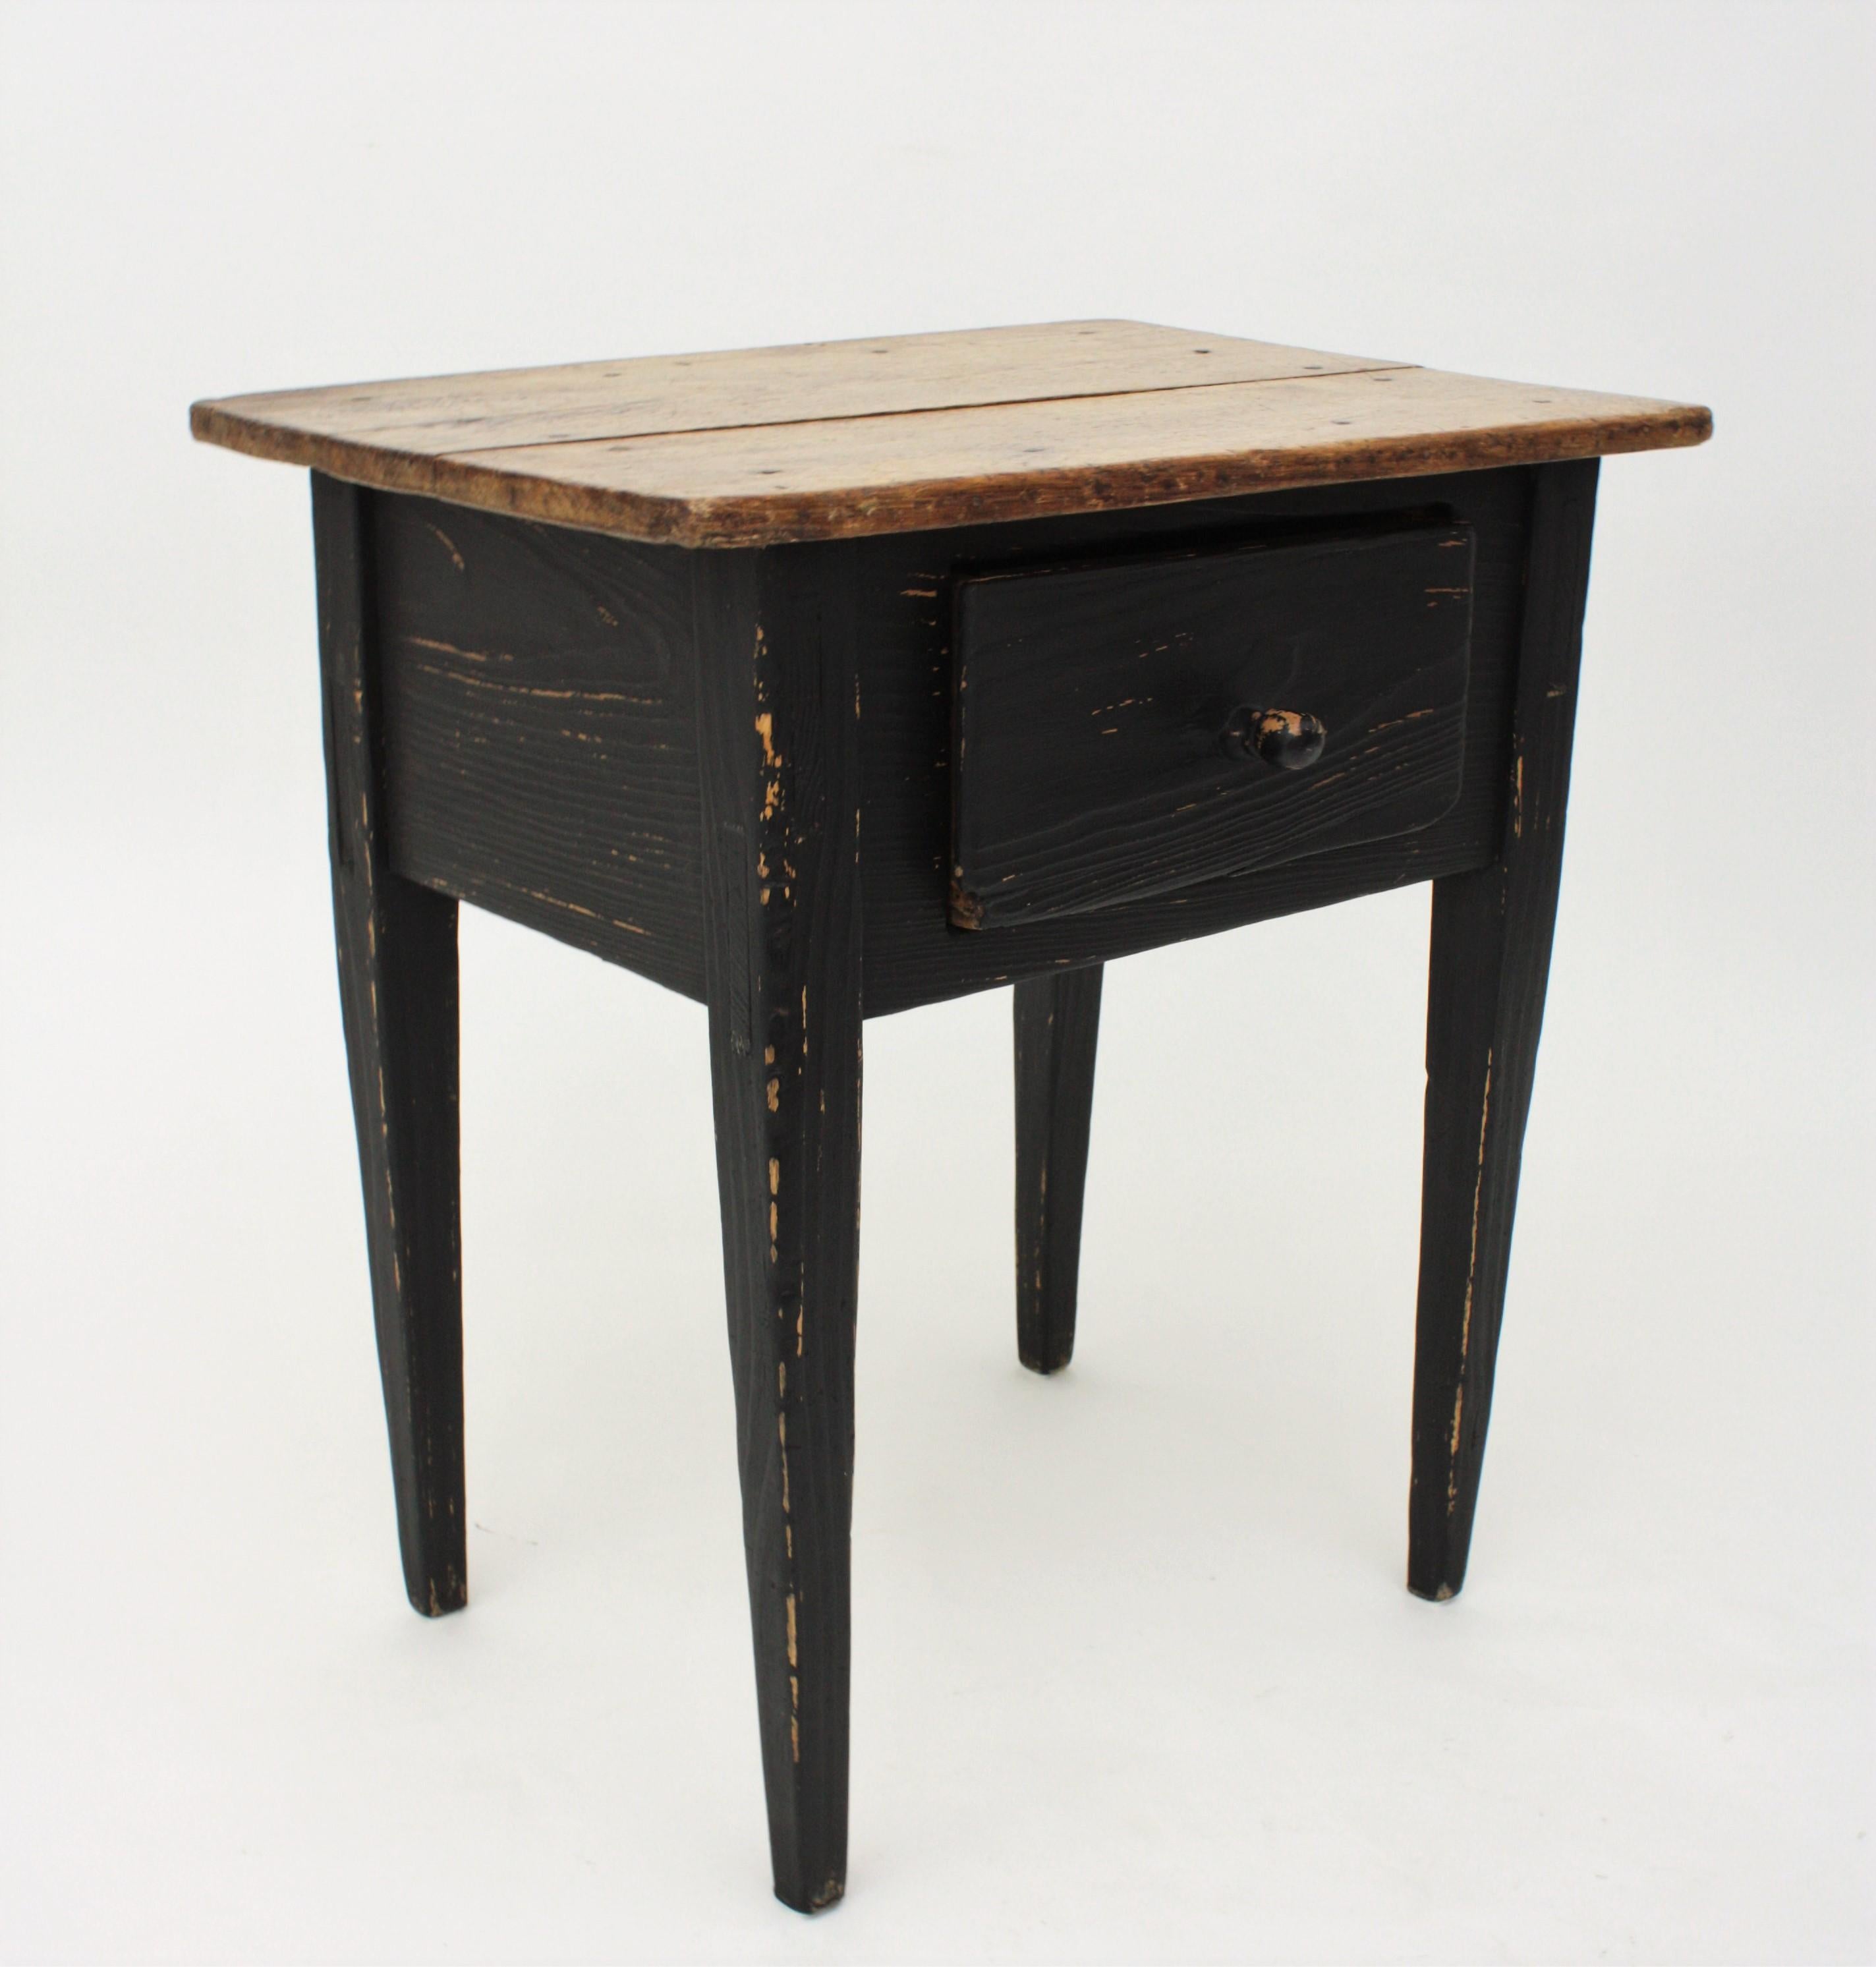 Early 20th century Spanish rustic black painted pine farm kitchen table or occasional table
Charming pinewood Spanish farmhouse or kitchen table with single drawer and black painted bottom. Beautiful patina. Interesting to be used as side table,